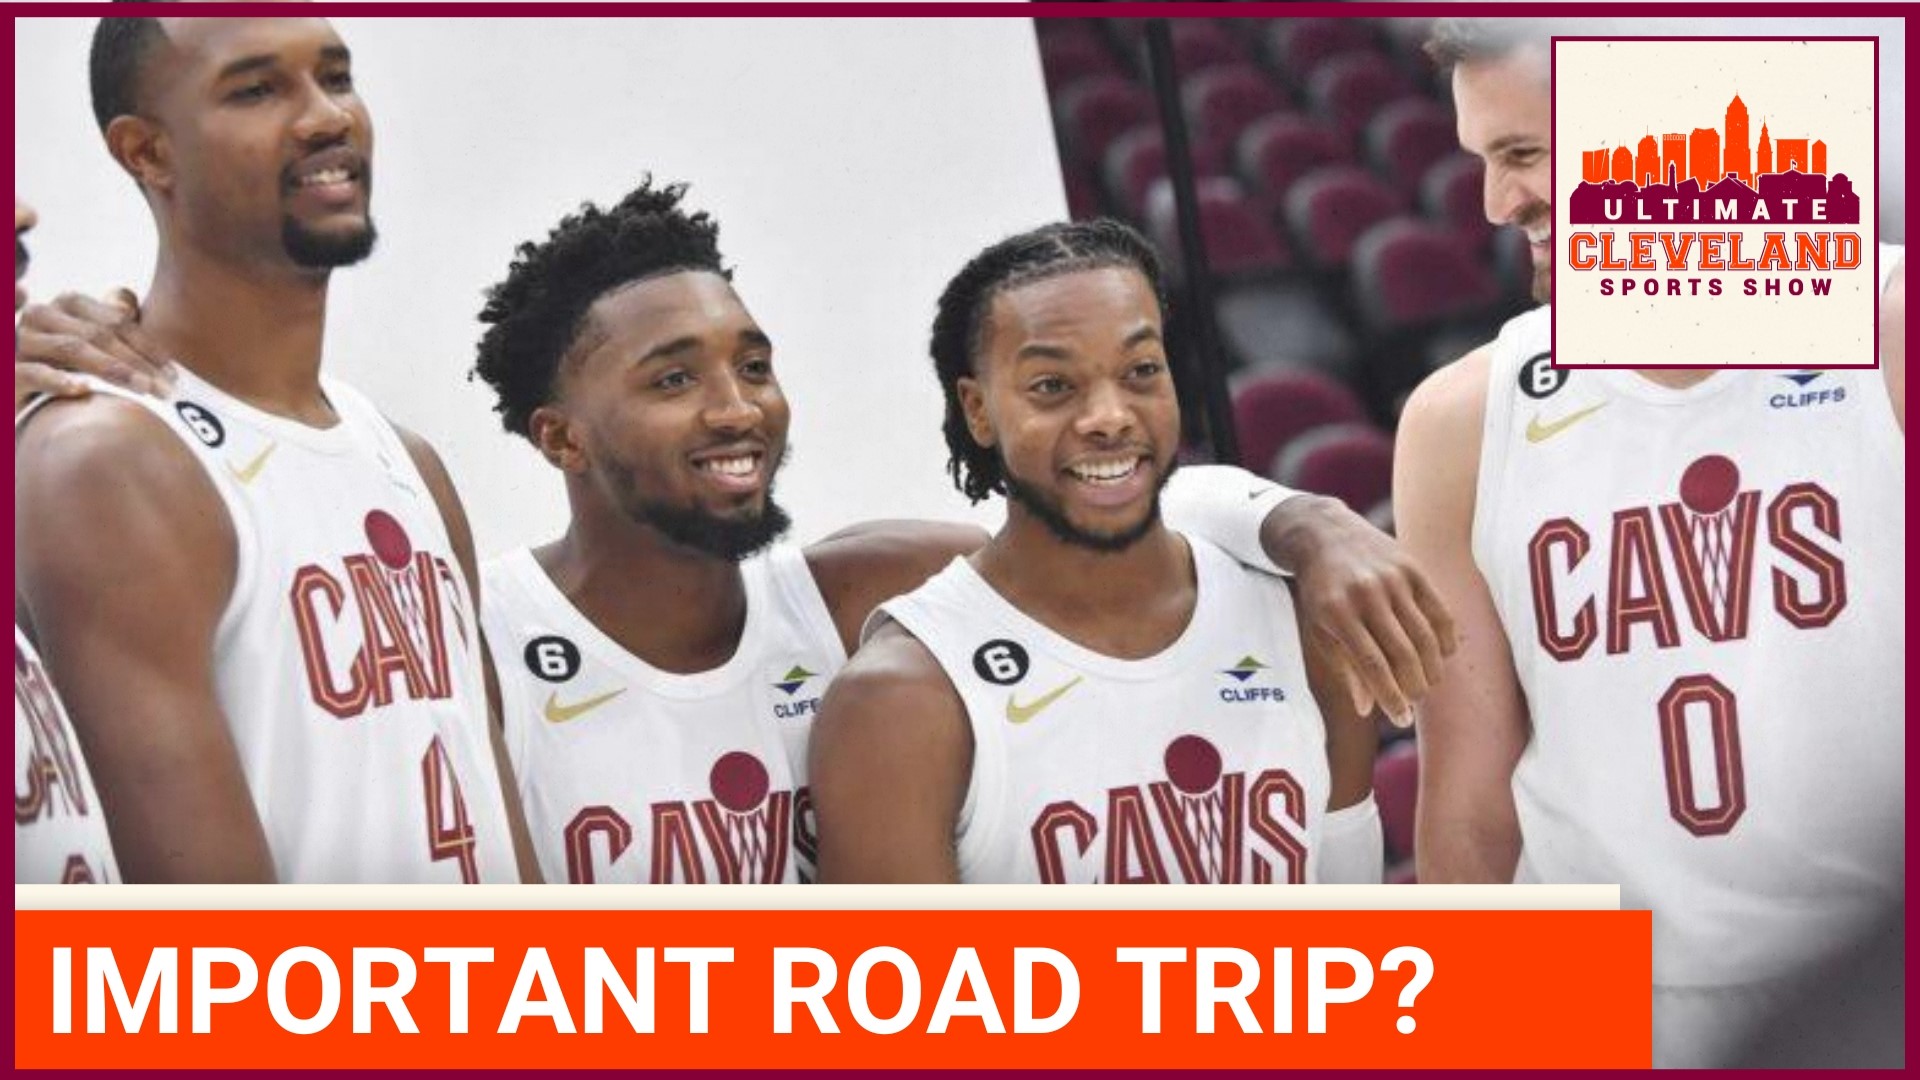 The Cleveland Cavaliers kickoff a five game road trip Friday night in Detroit. How important is the early road test for the Cavs?